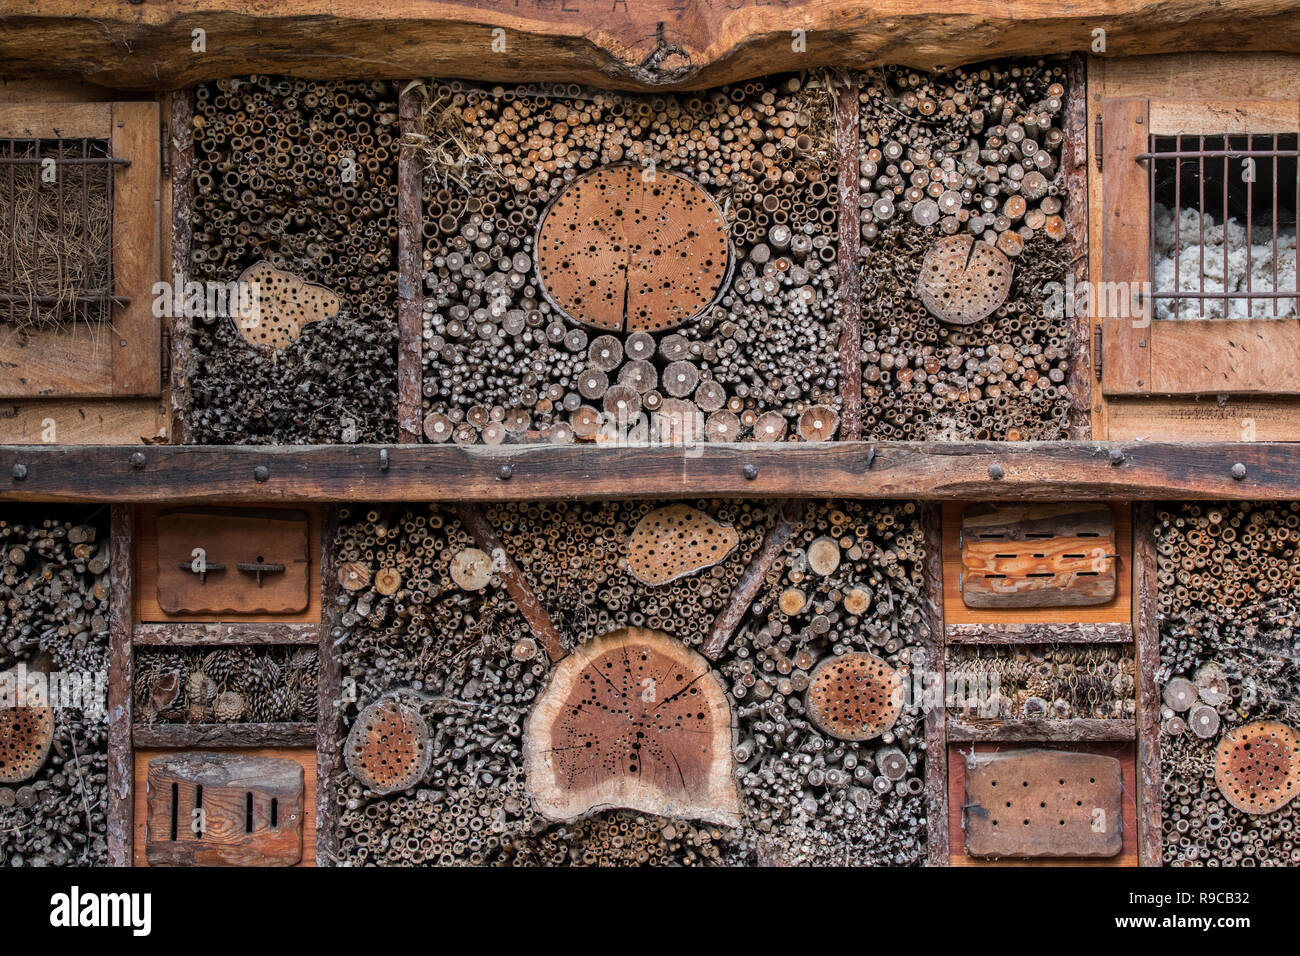 Insect hotel for solitary bees and artificial nesting place for insects / invertebrates offering nest holes / cavities in hollow stems and wood blocks Stock Photo